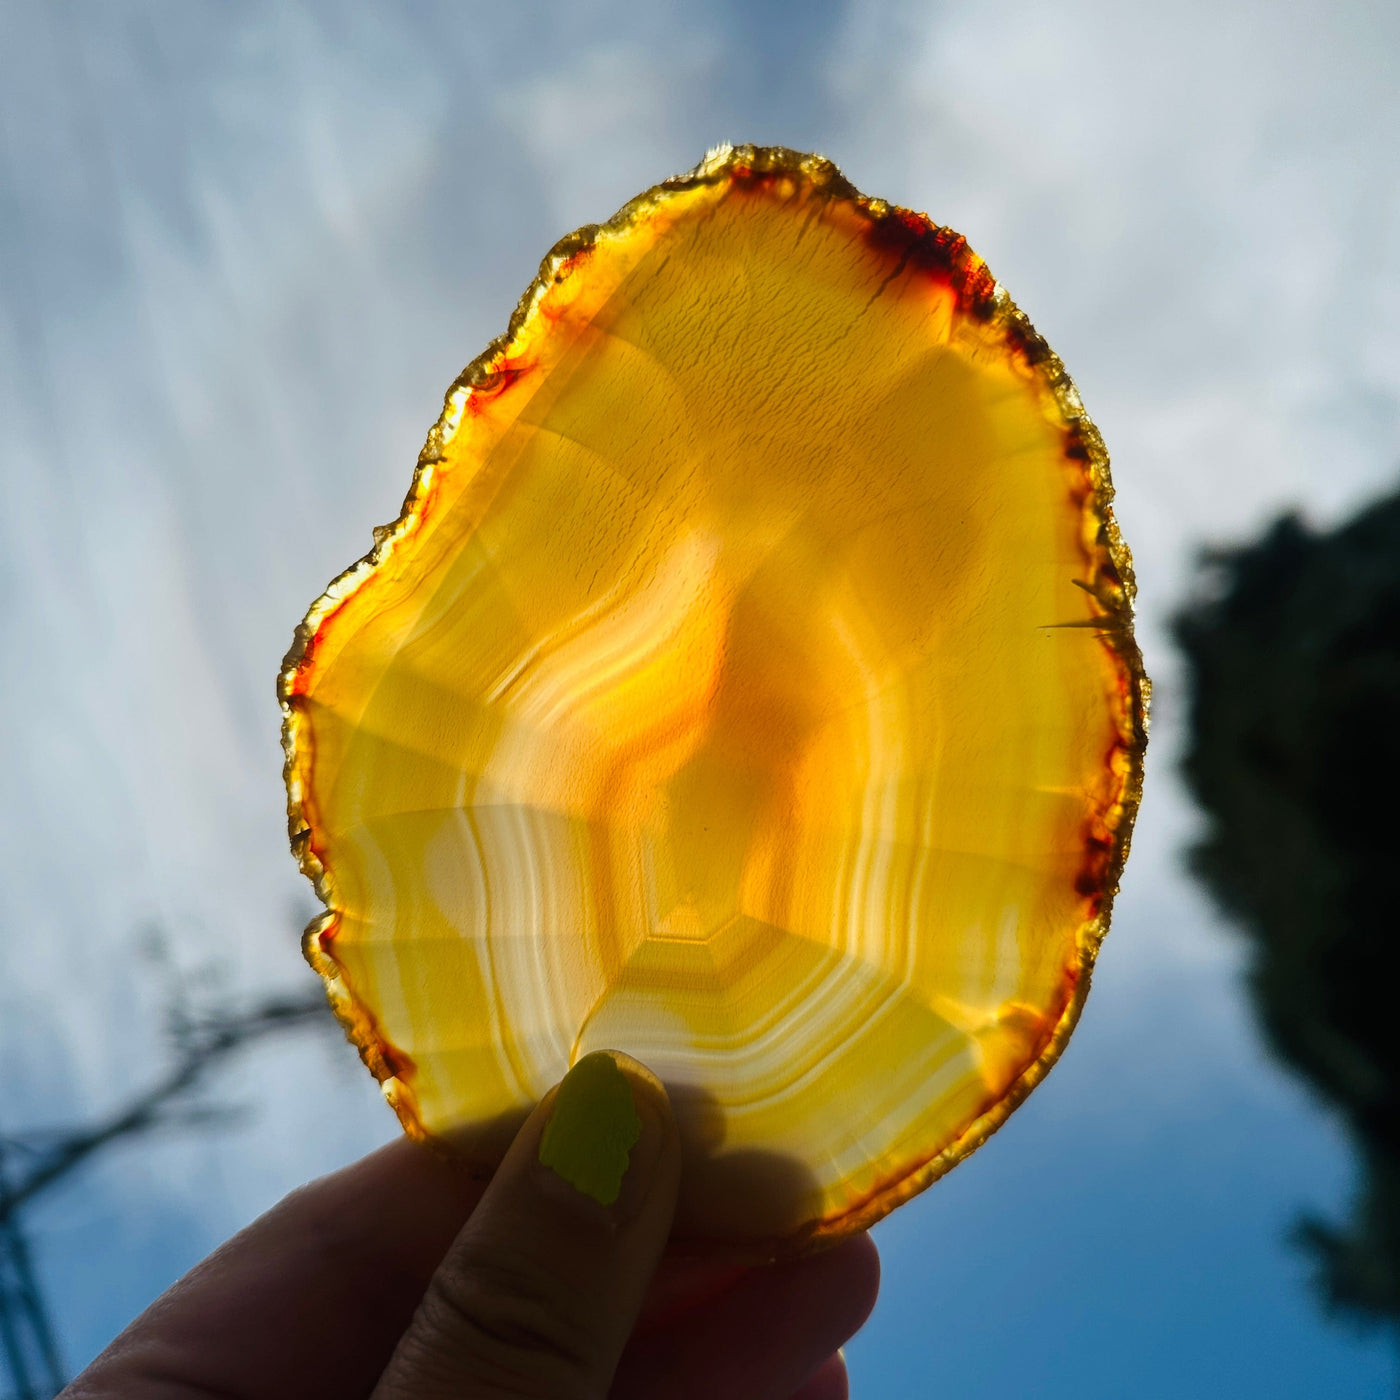 Iris Agate Slice Set - Six Agate Crystal Slices slice 2 in hand in front of sun backlit